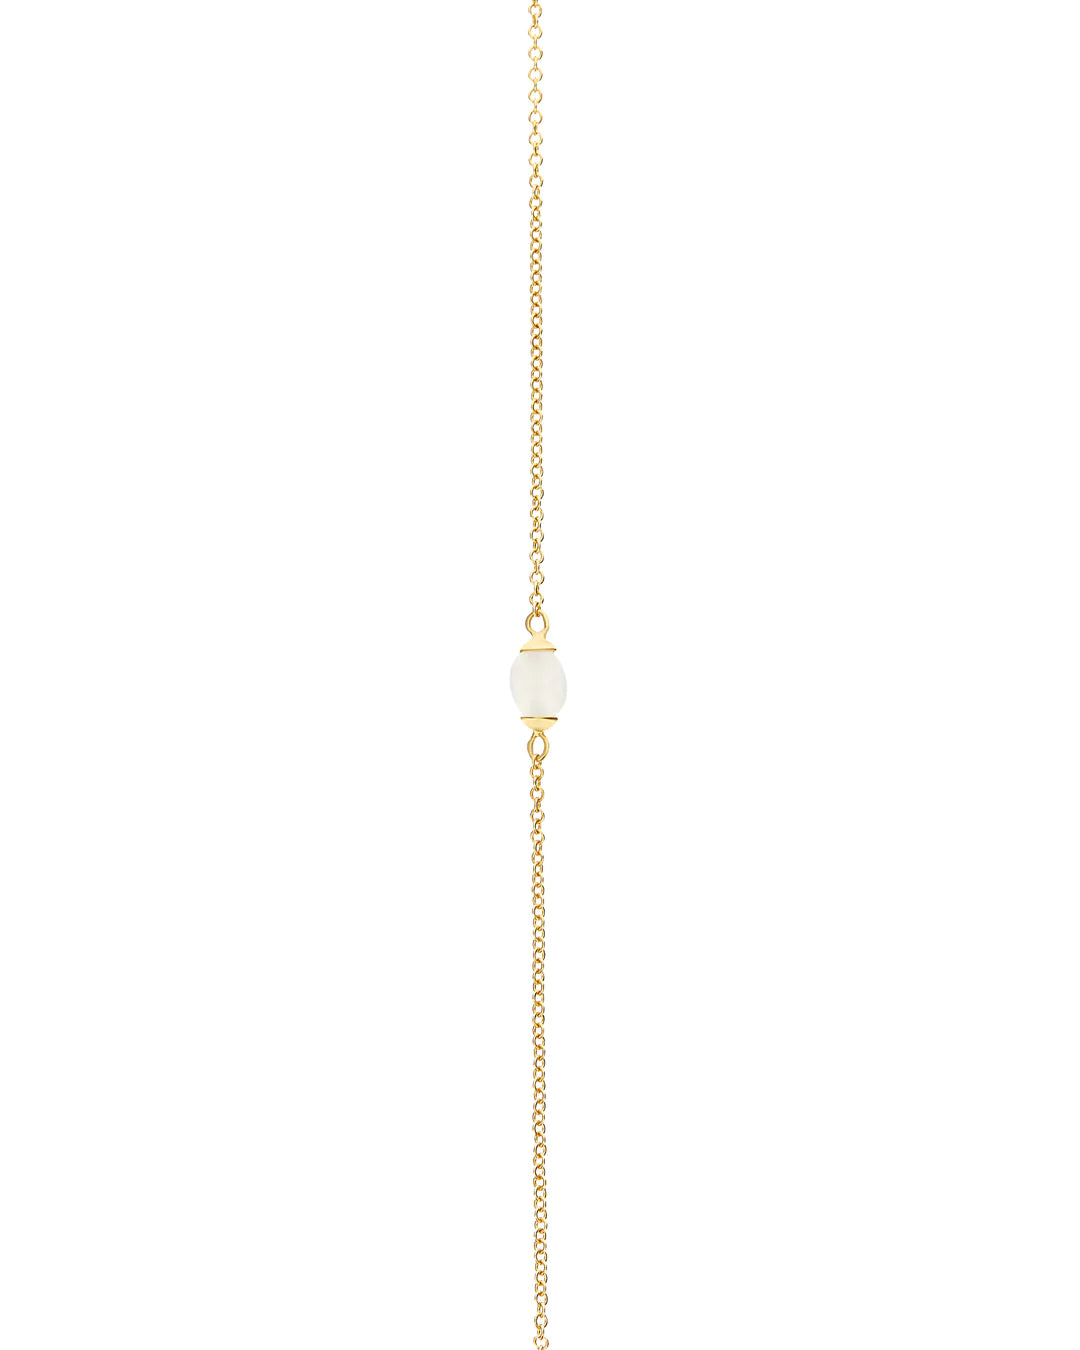 "WHITE DESERT" GOLD AND MOONSTONE NECKLACE (LARGE)